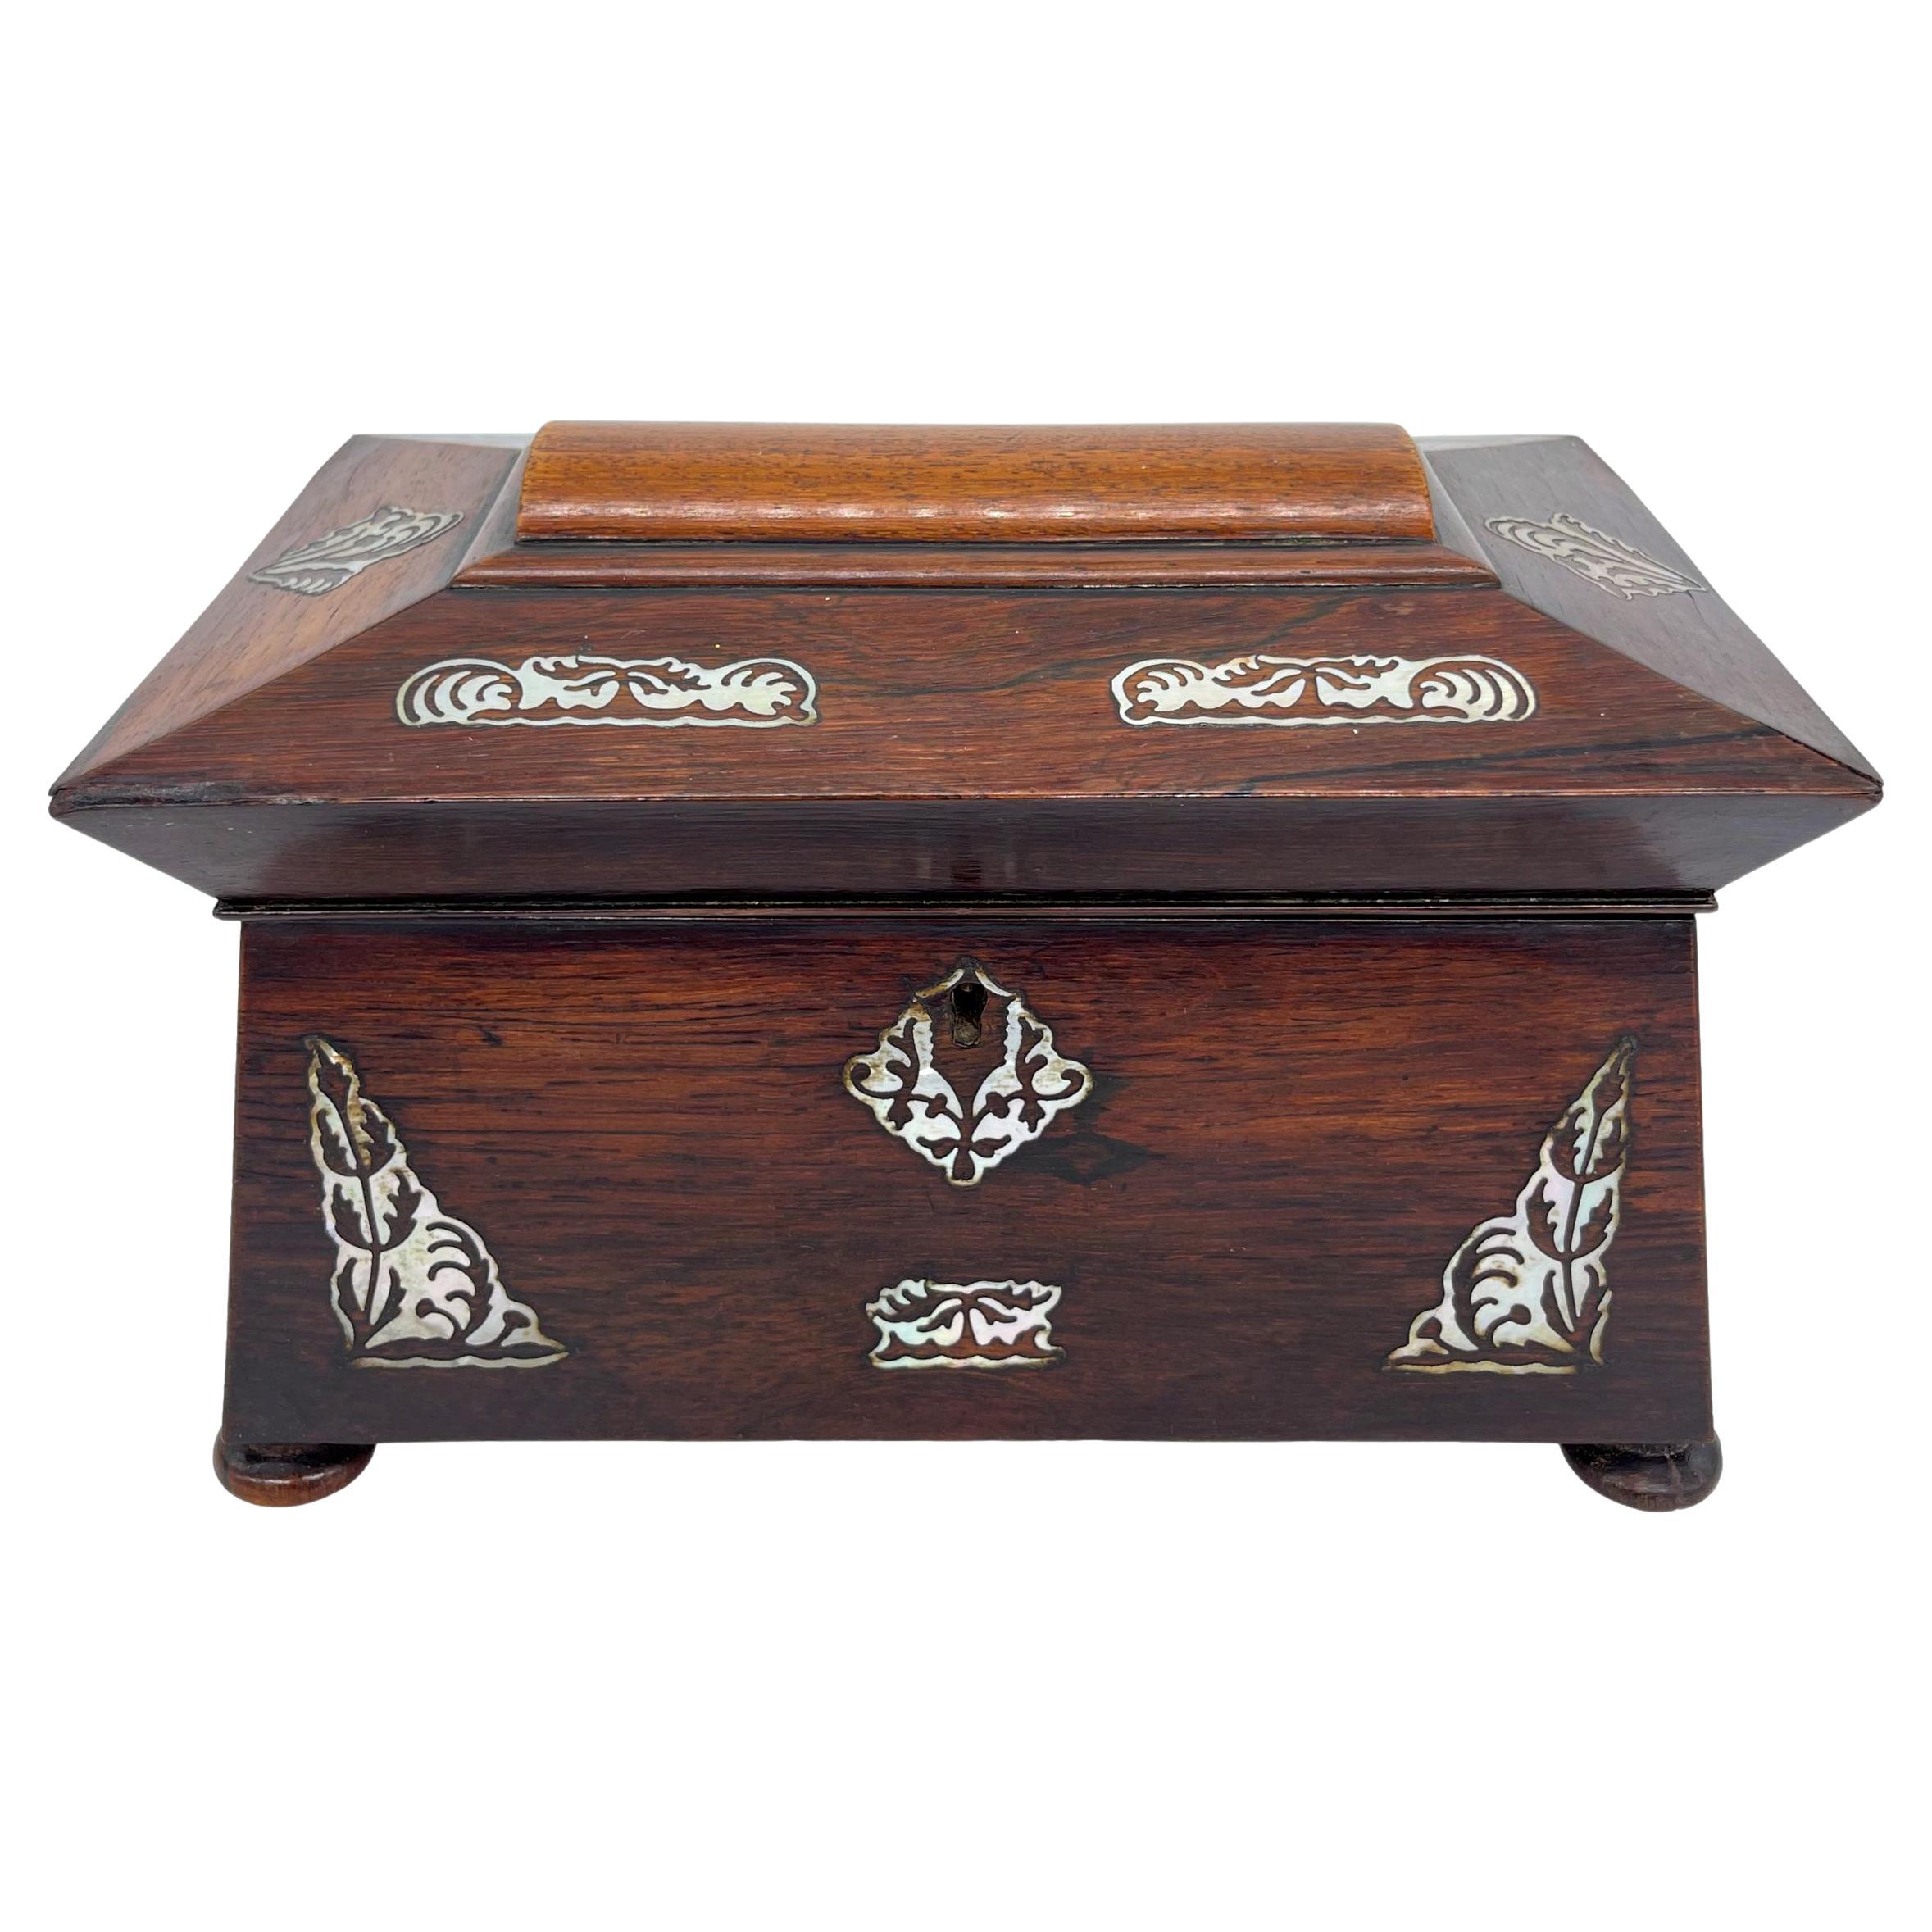 William IV Rosewood and Mother-of-Pearl Inlaid Tea Caddy, English, ca. 1835 For Sale